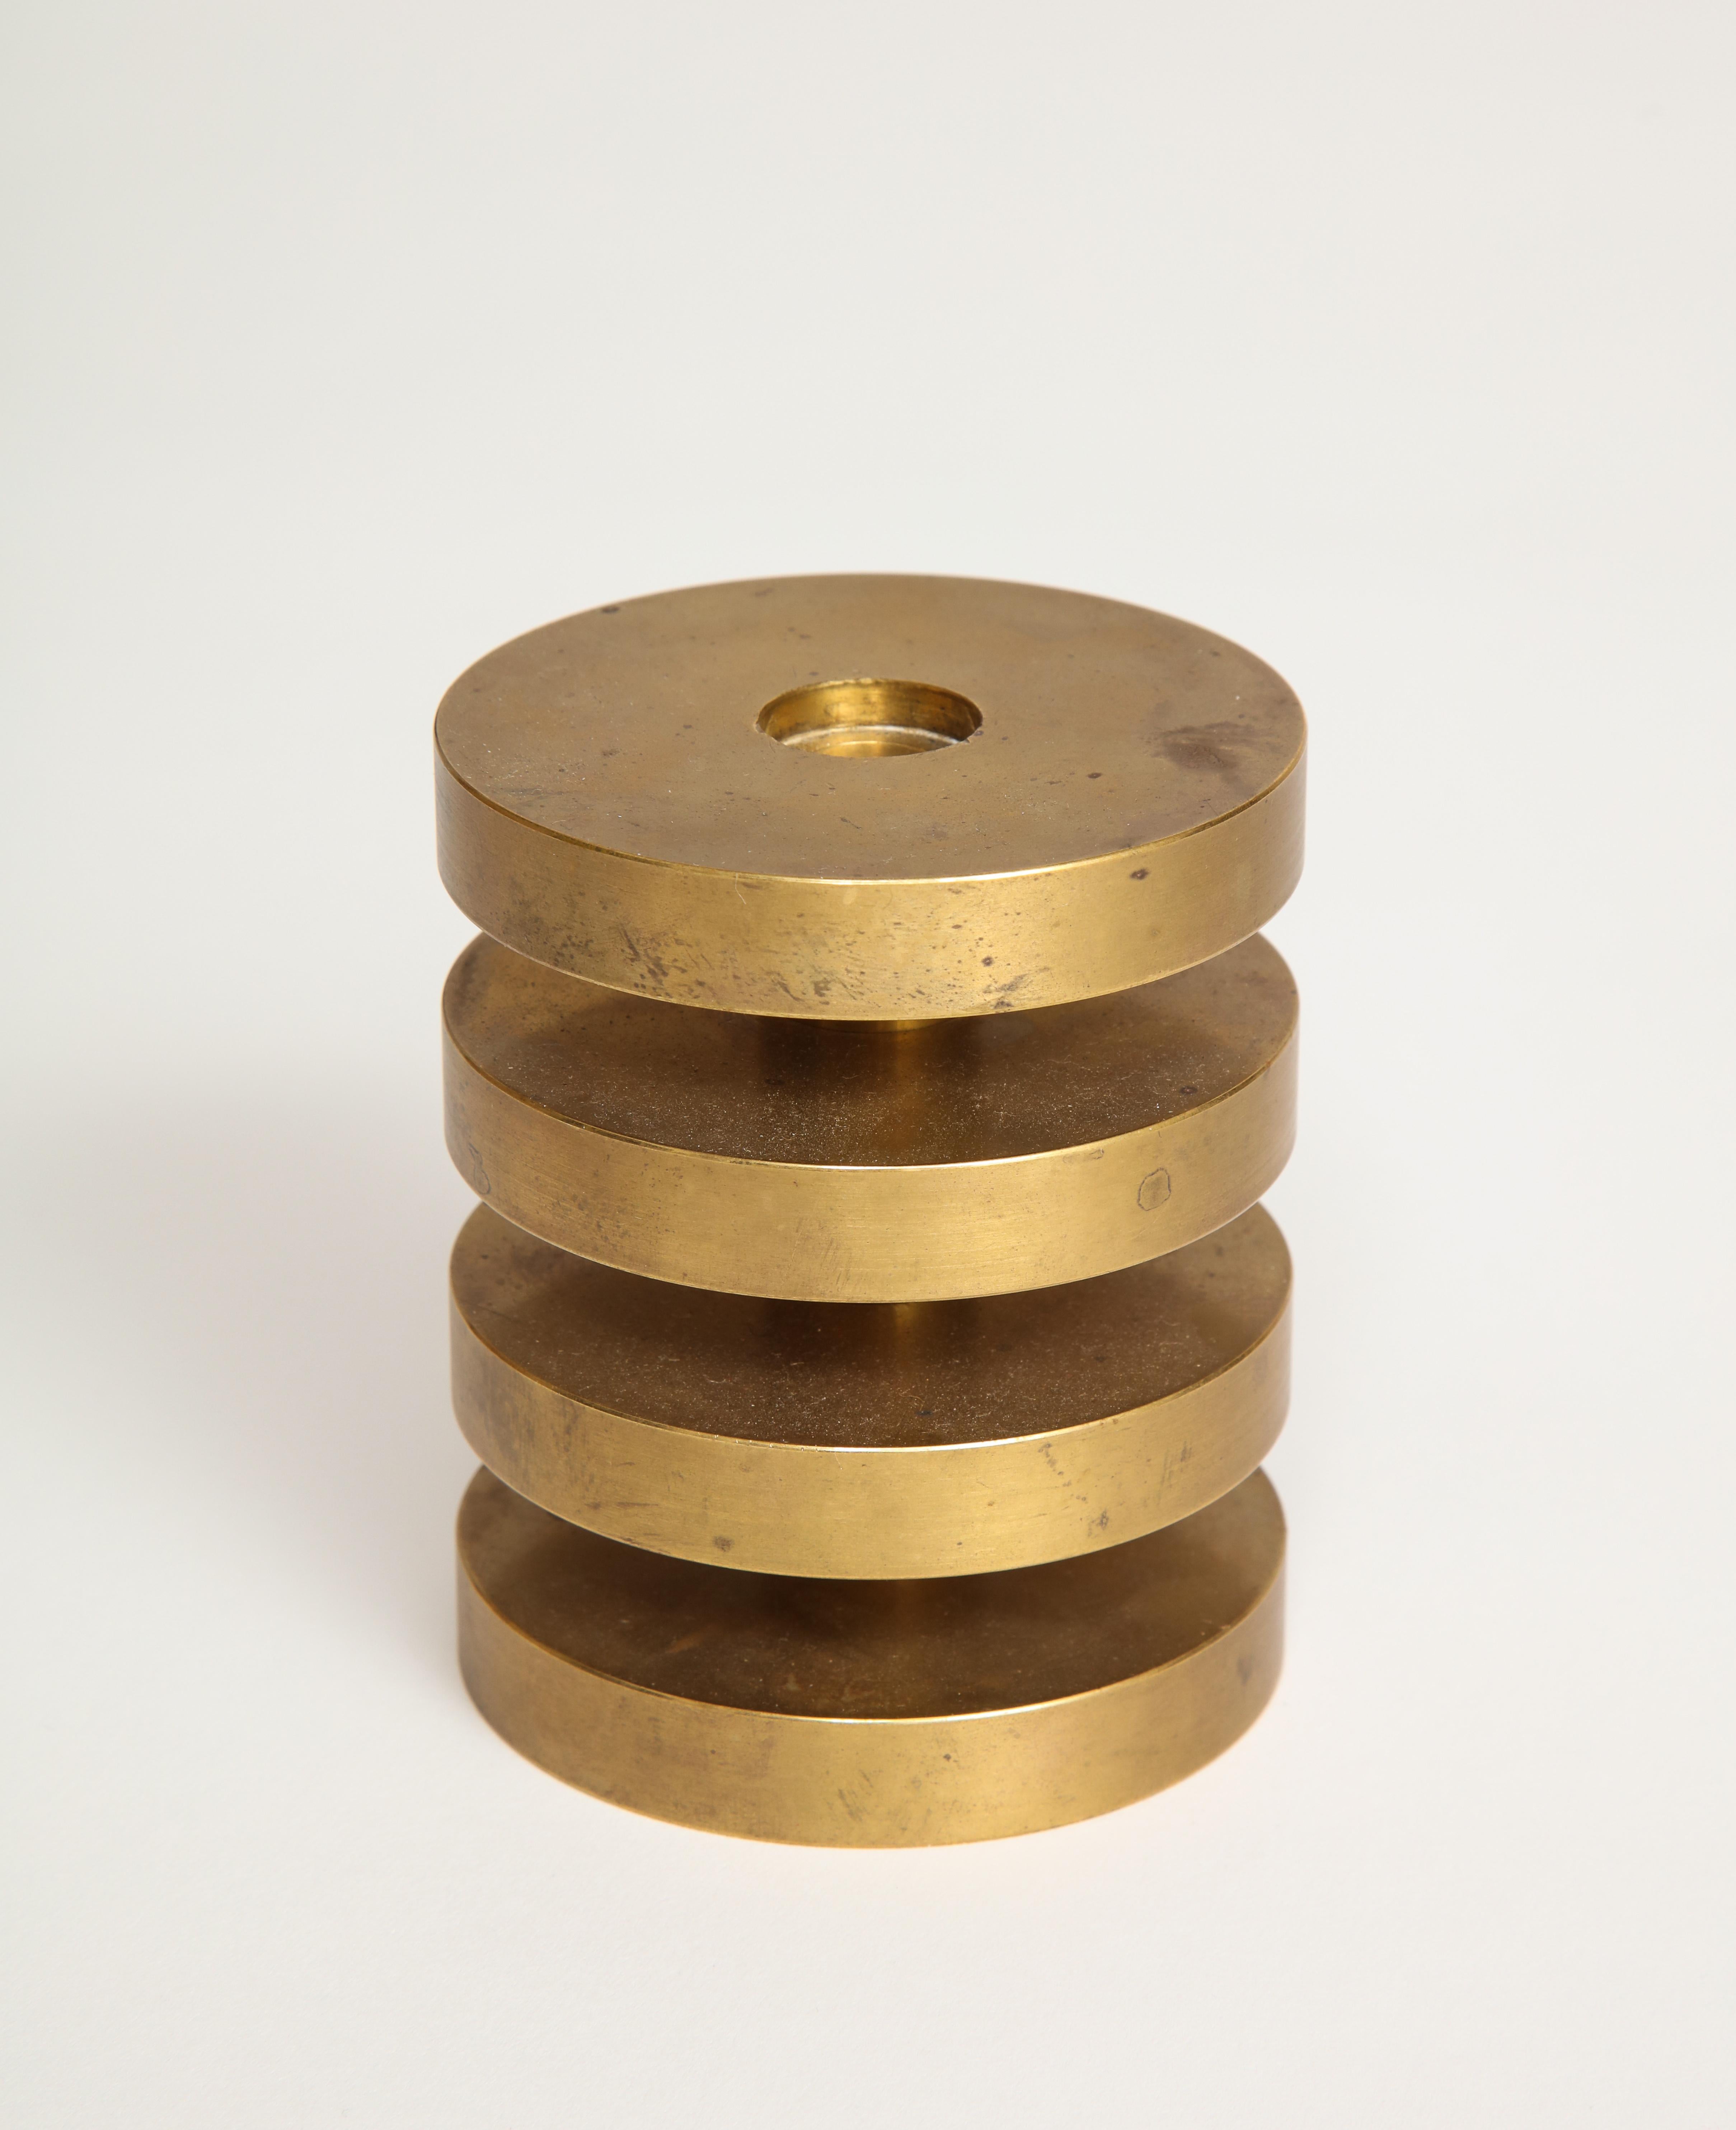 Modernist Vintage Solid Brass Stacks Sculpture In Good Condition For Sale In New York, NY